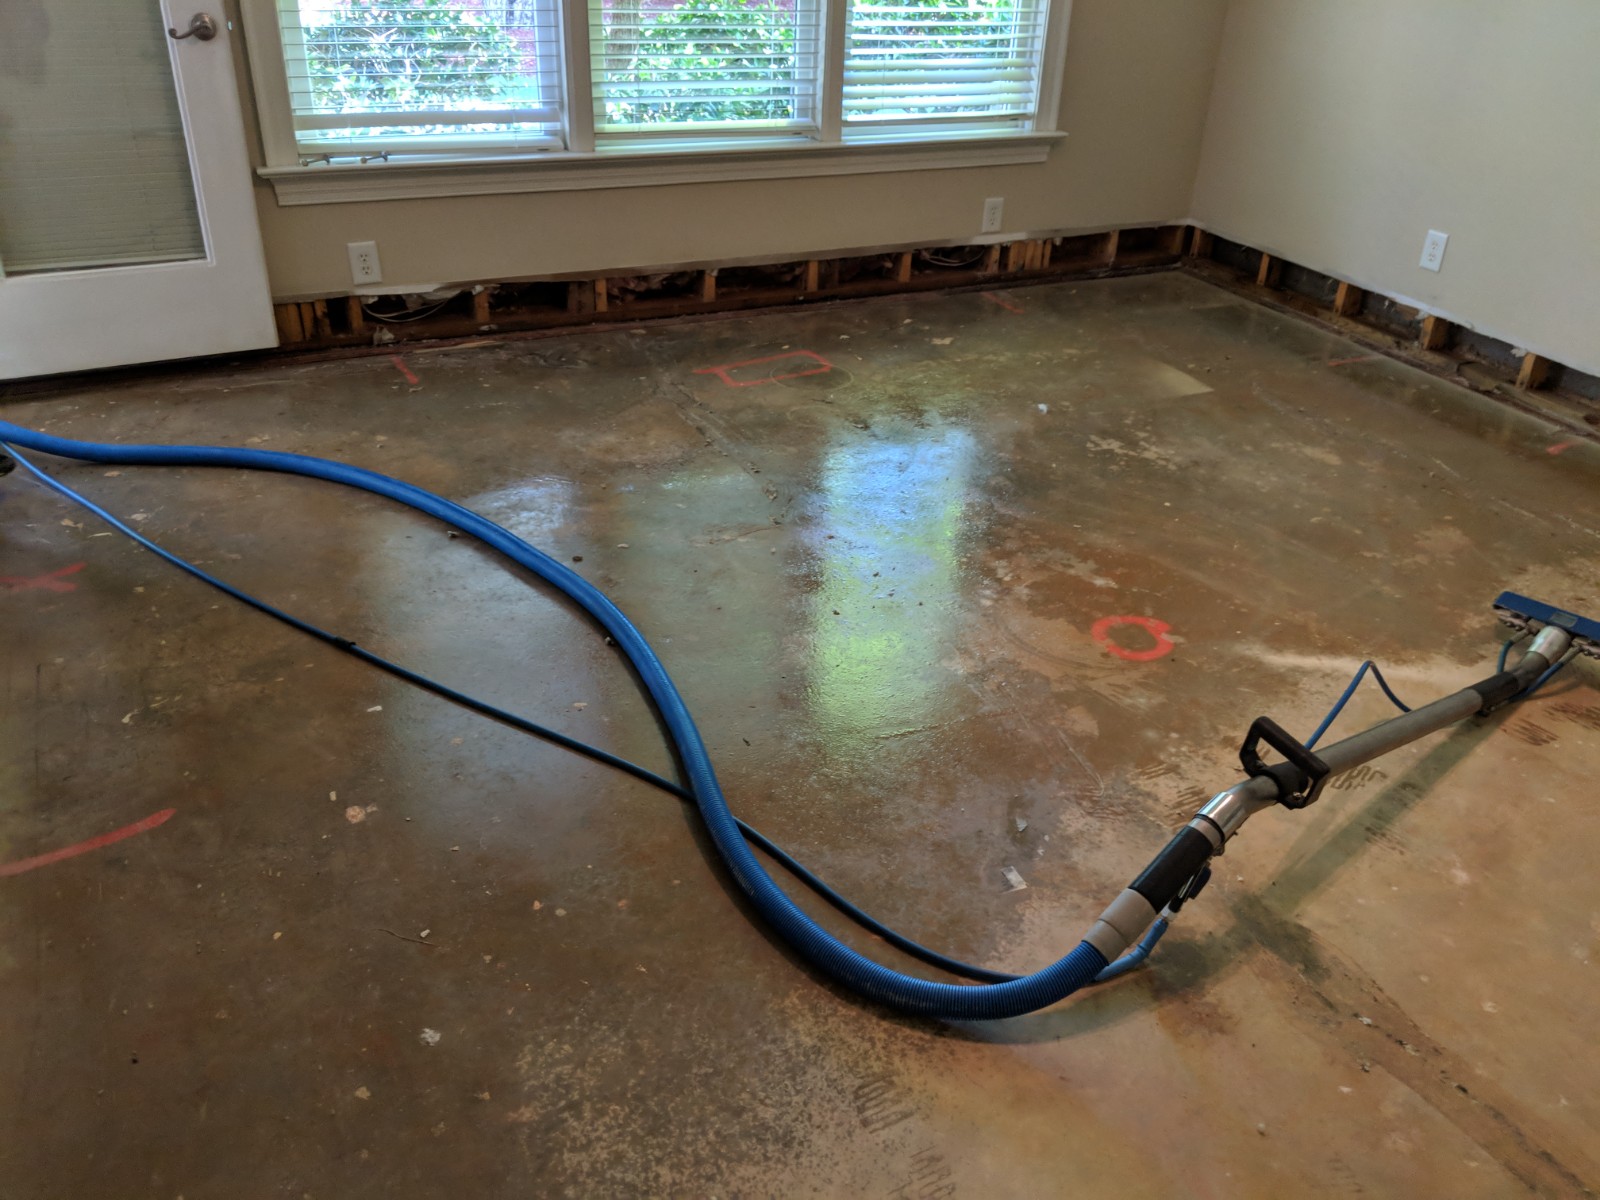 How To Fix Water Damage In The Kitchen Carpets?